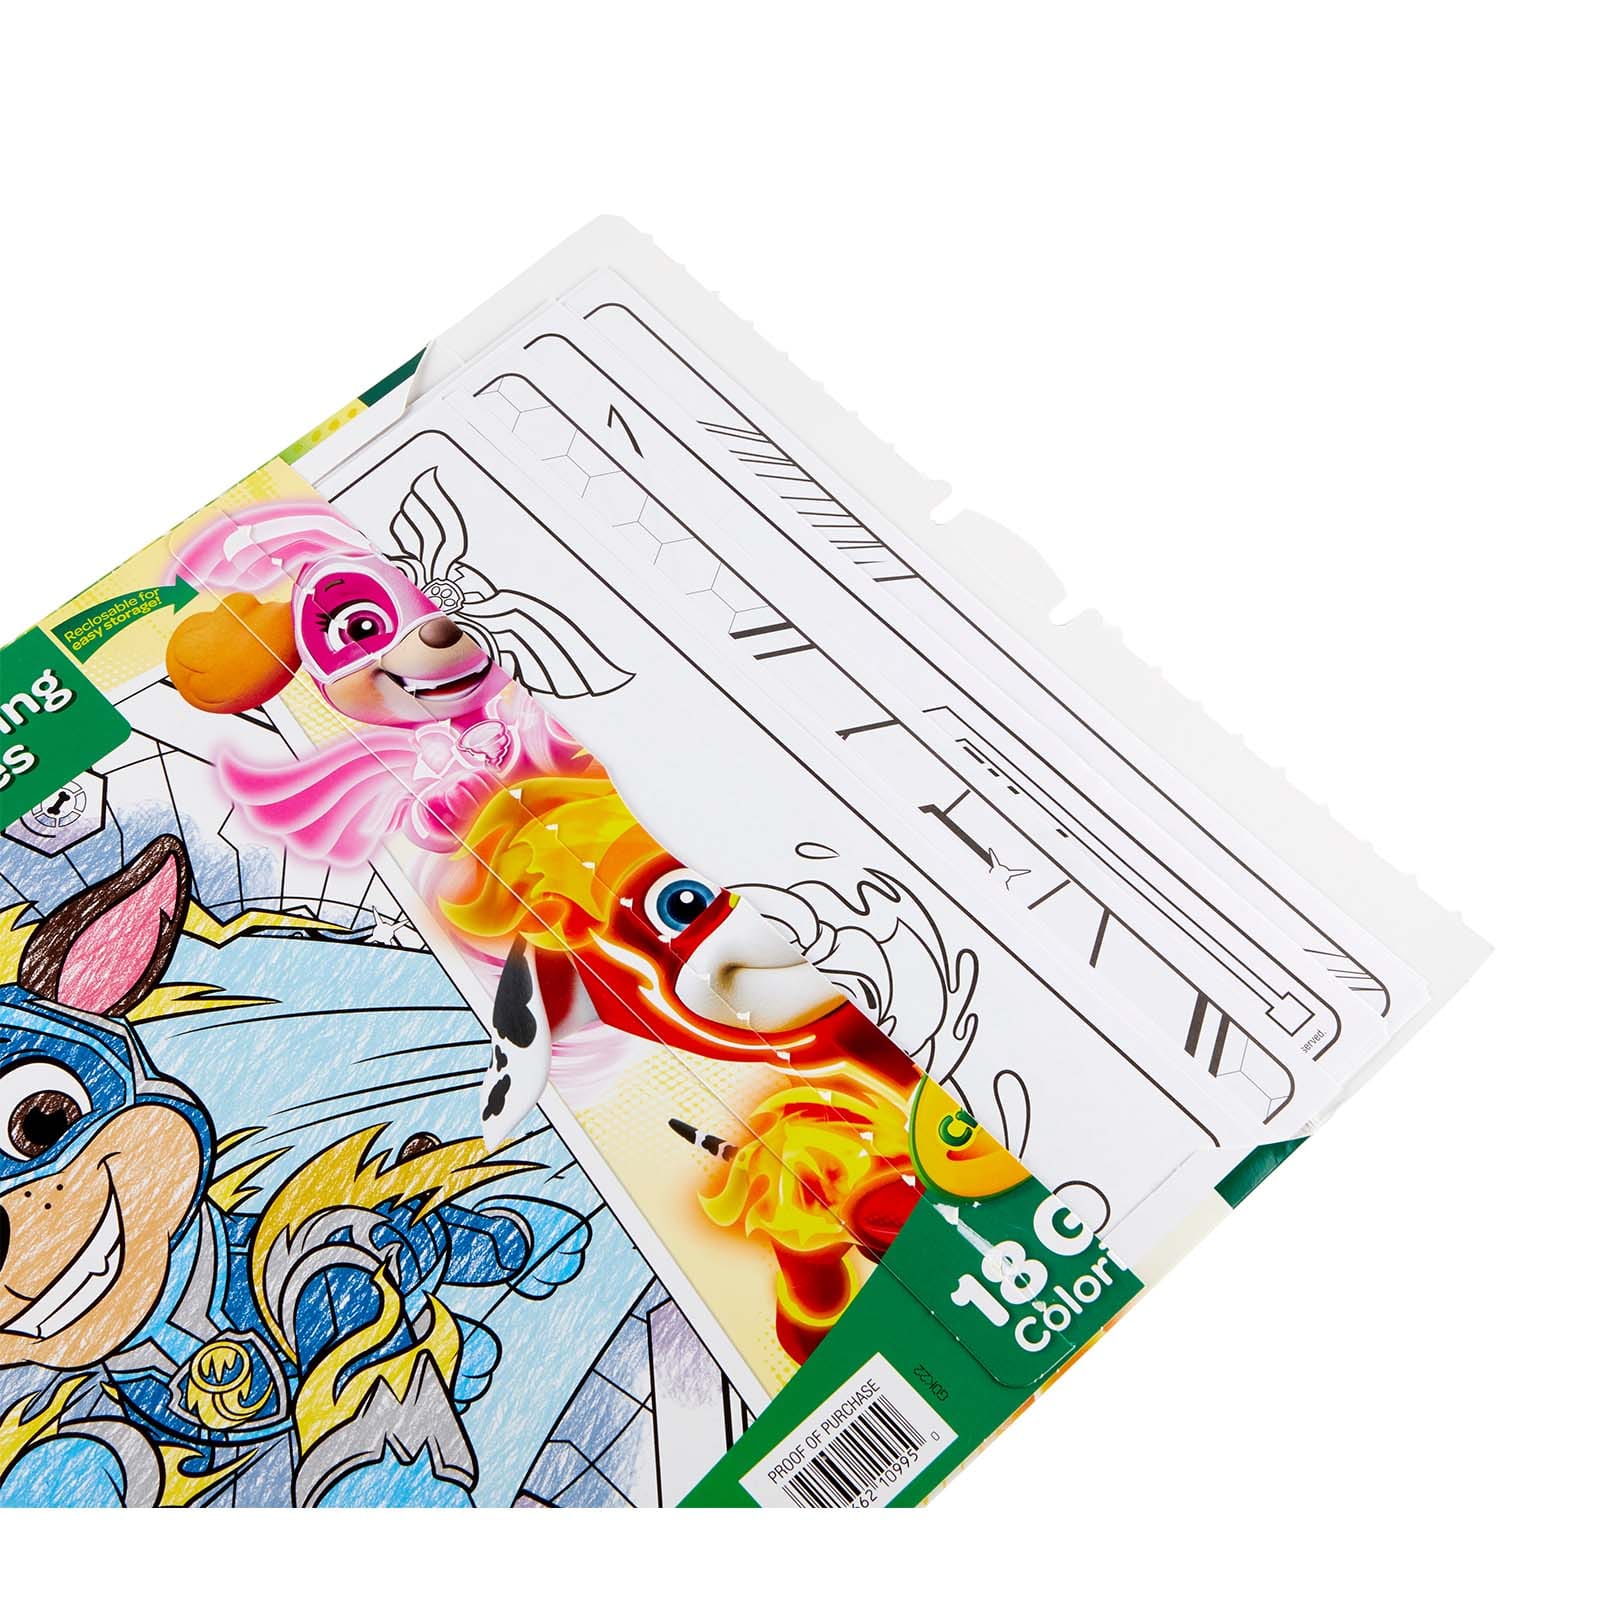 Crayola Giant Coloring Pages – Paw Patrol - Shop Books & Coloring